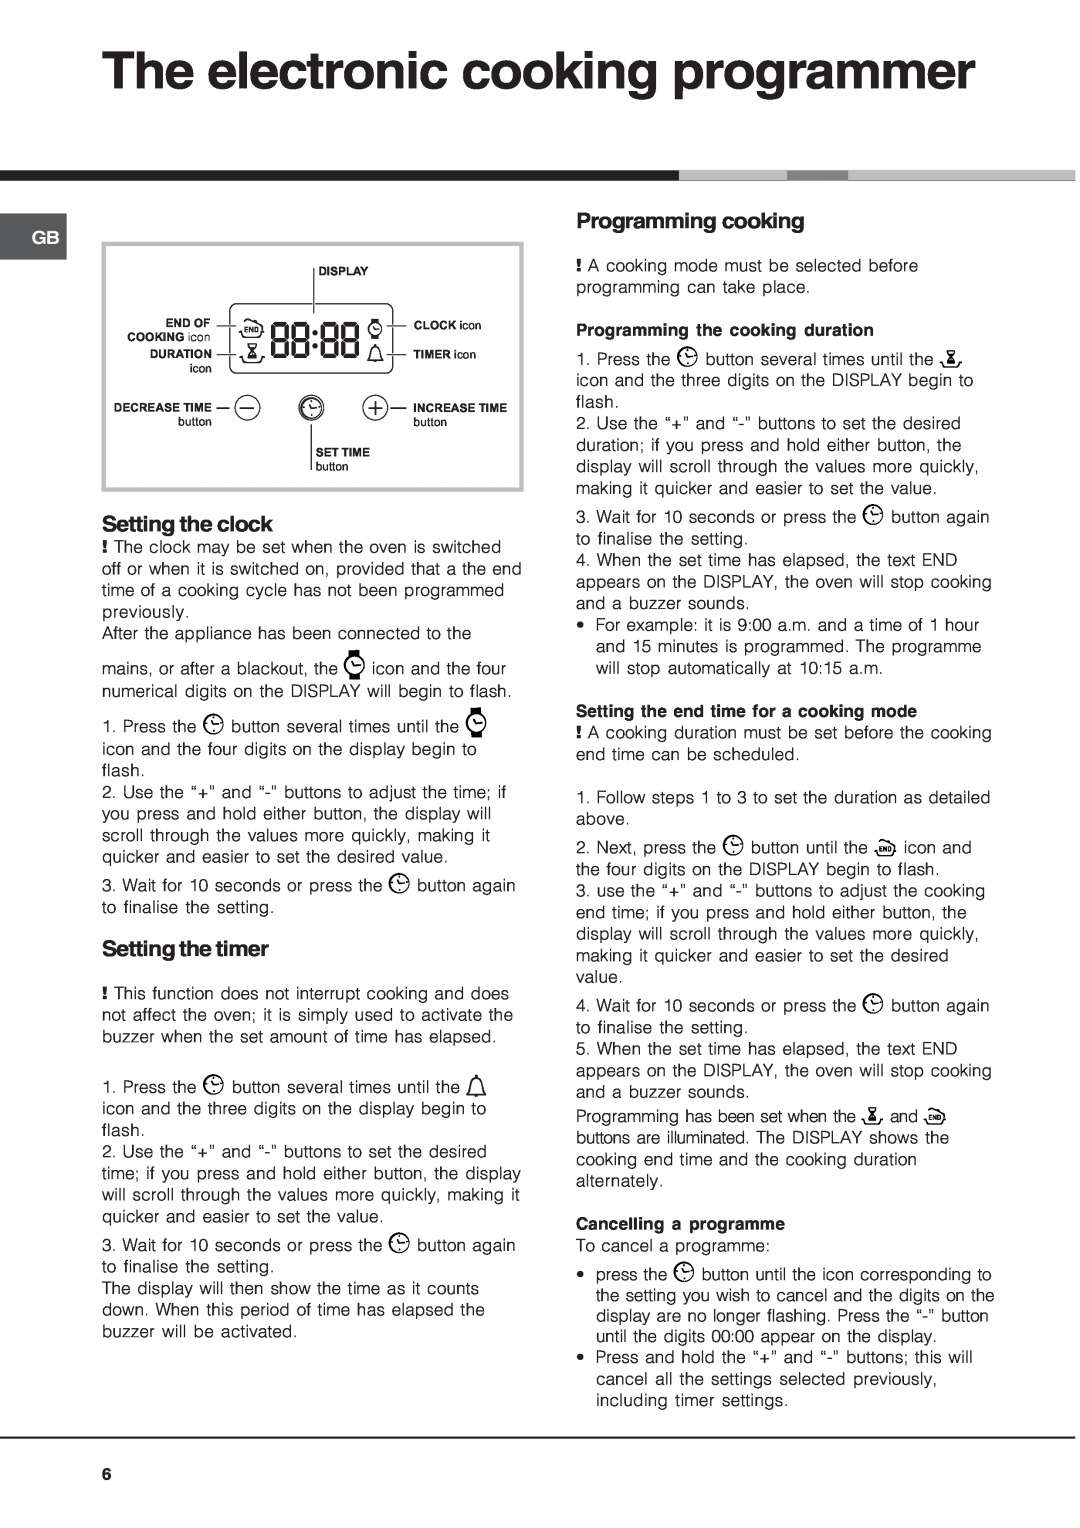 Hotpoint SE861X/1 manual The electronic cooking programmer, Setting the clock, Setting the timer, Programming cooking 